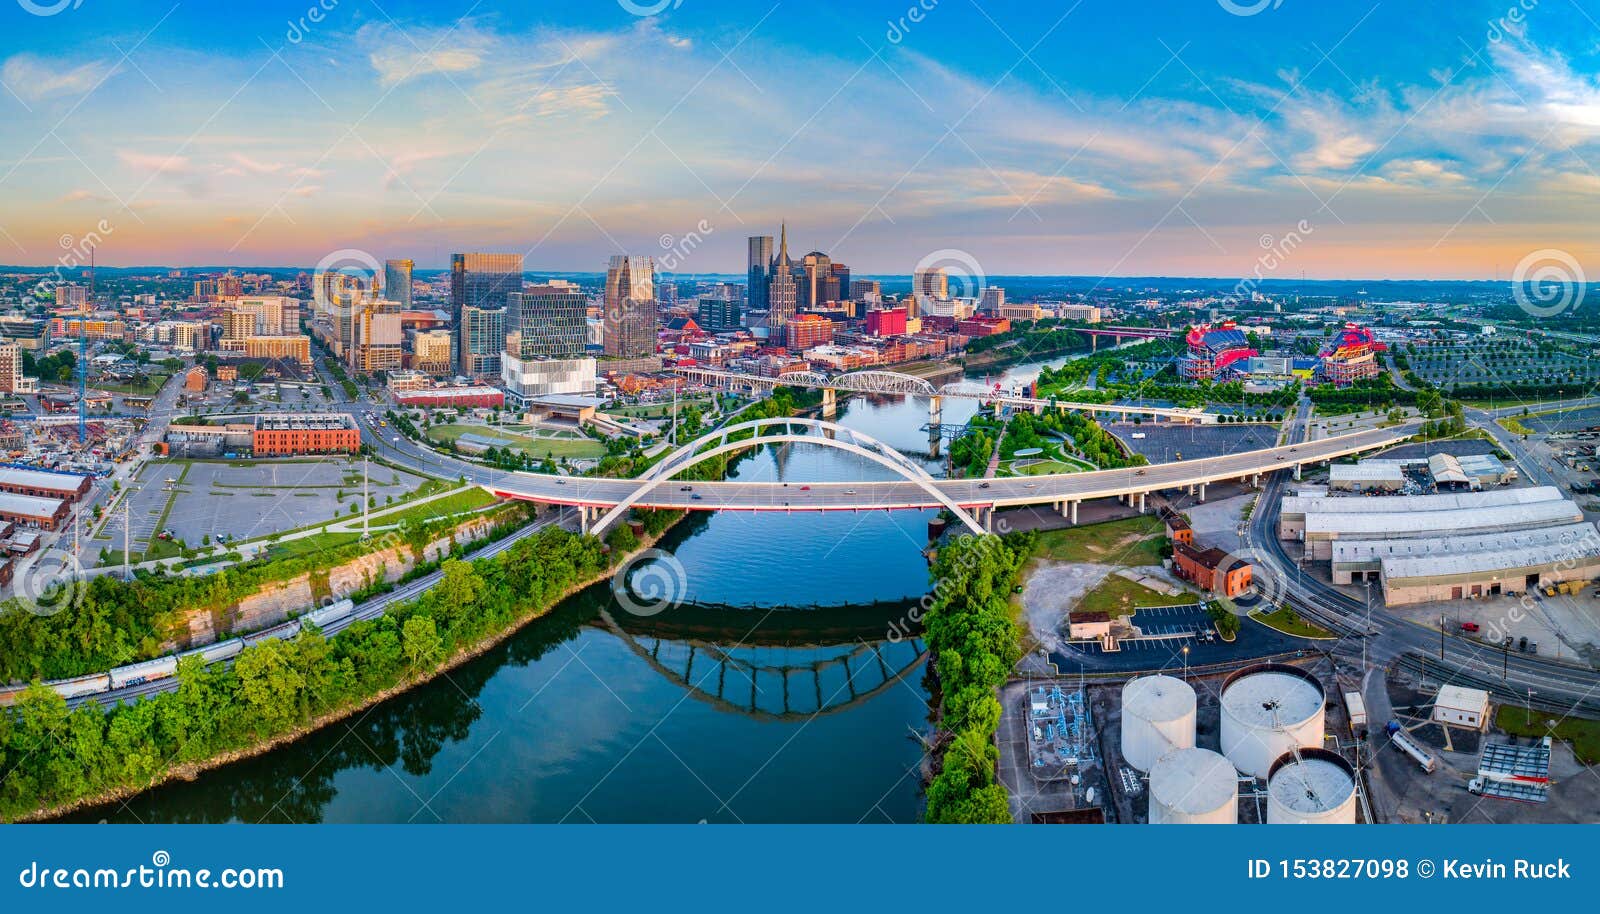 nashville tennessee tn drone skyline aerial and cumberland river